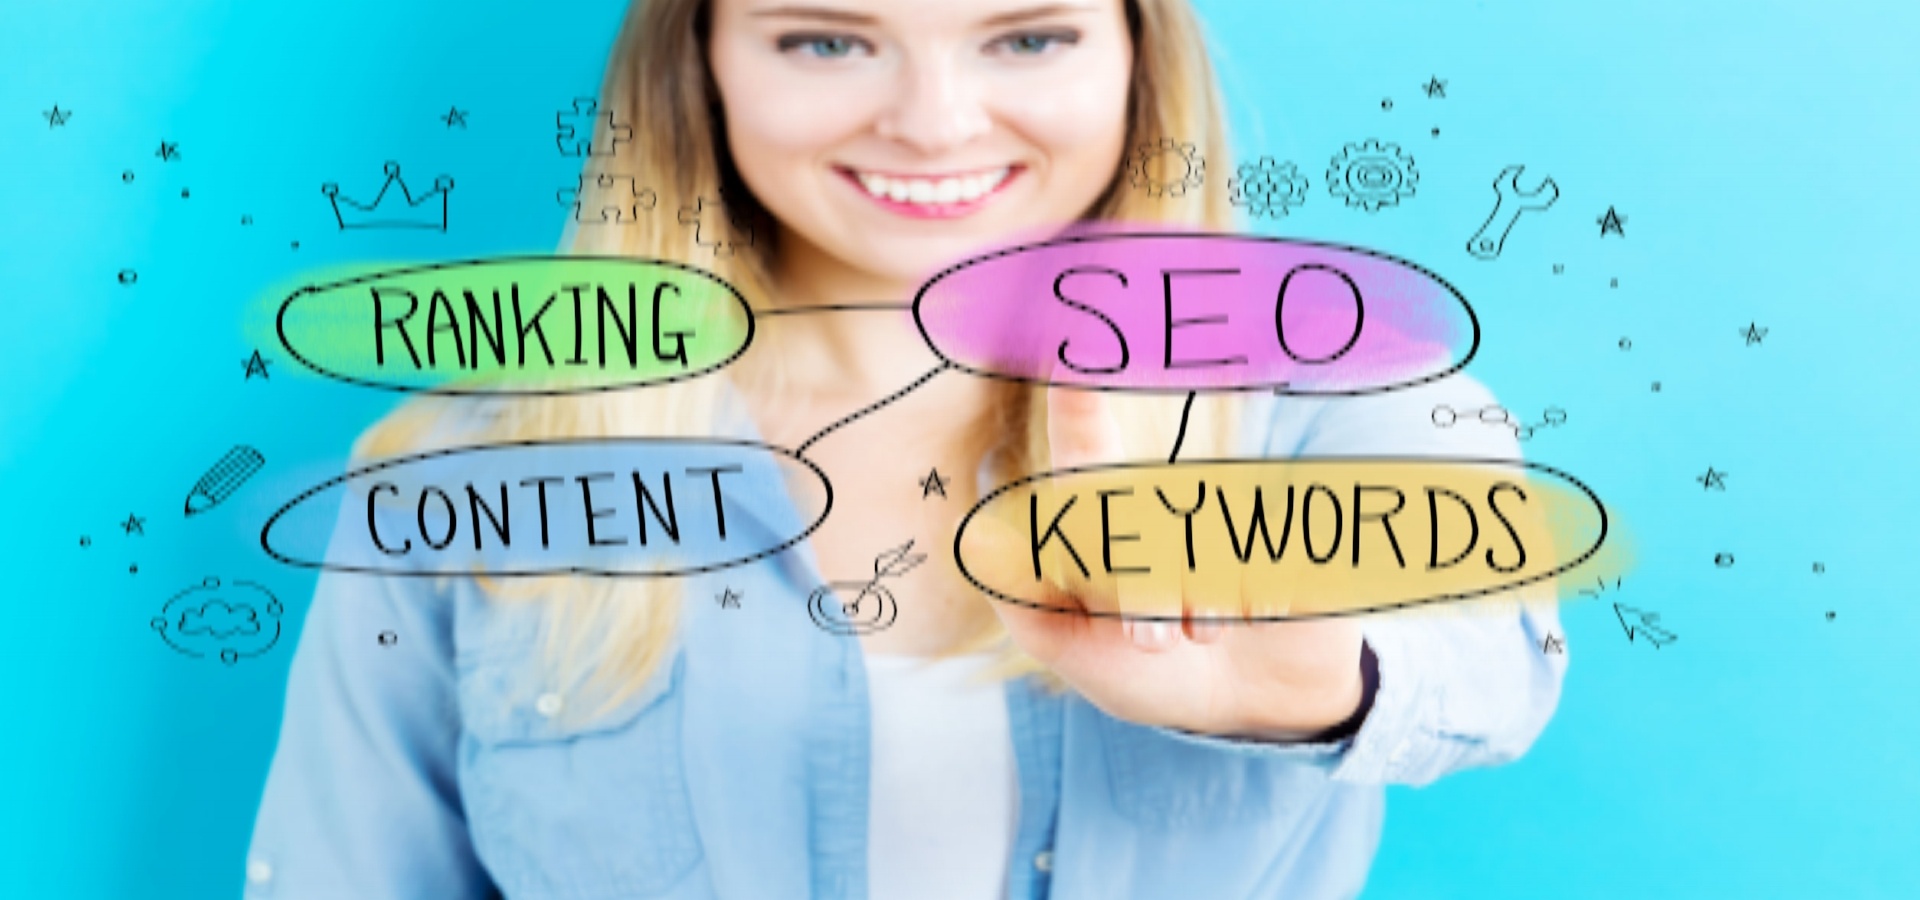 Woman smiling at colorful word bubbles with the words "Ranking, SEO, Content and keywords"